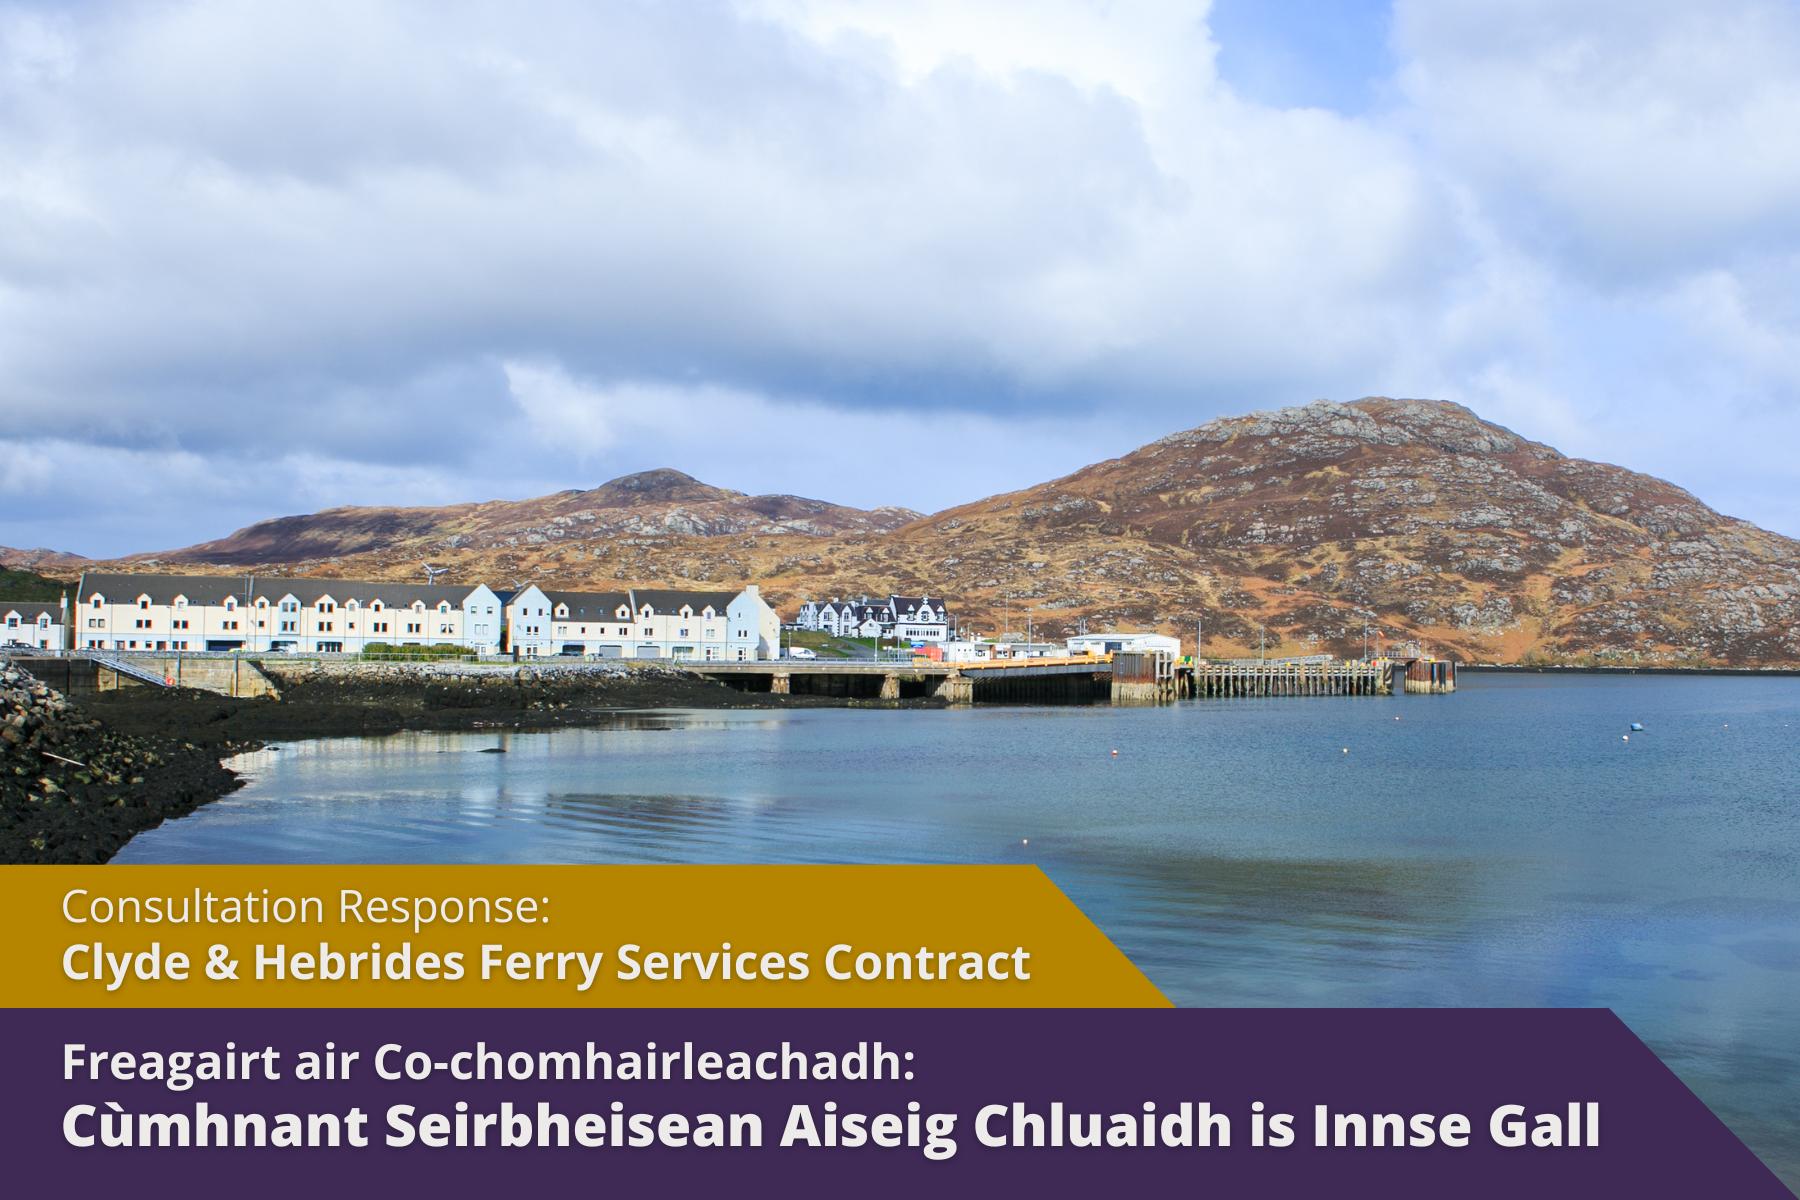 Picture: Seaside village in the Hebrides with text over picture. Text reads 'Consultation Response: Clyde & Hebrides Ferry Services Contract'